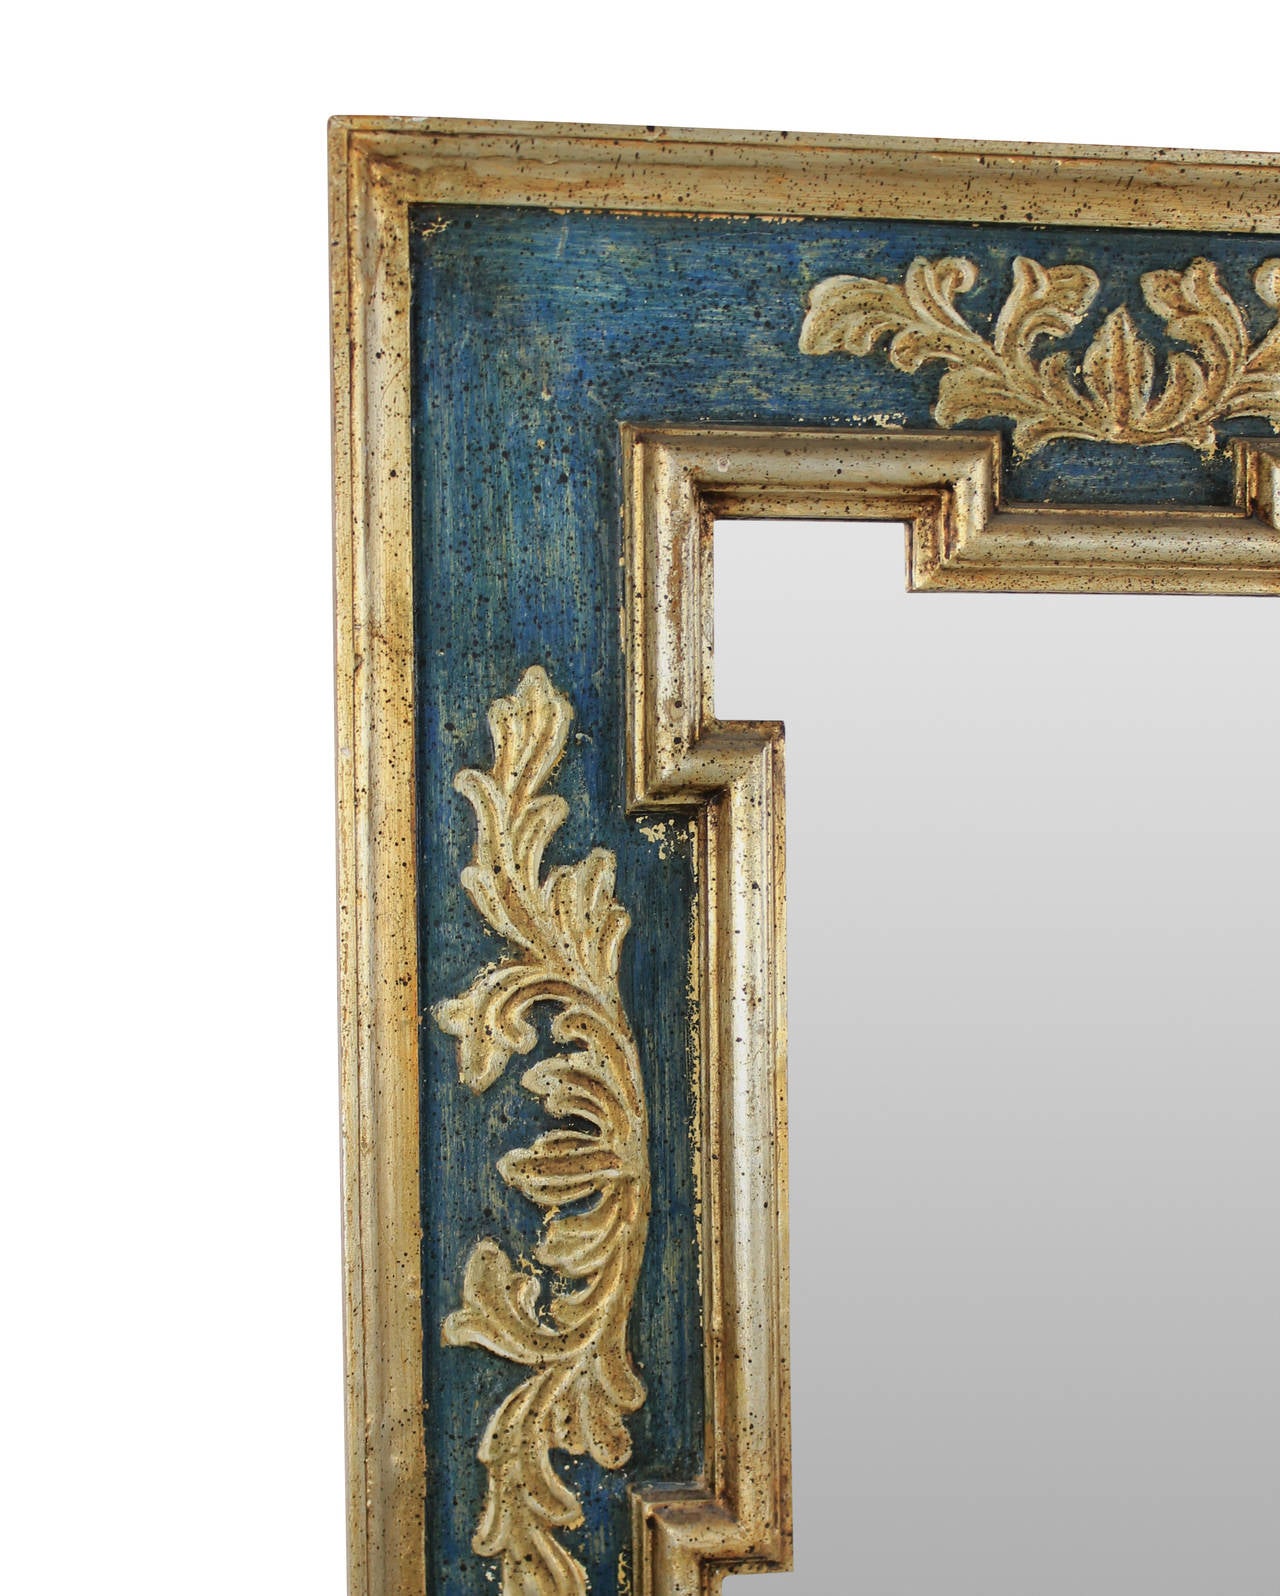 An Italian painted and gilded mirror in the Renaissance style.